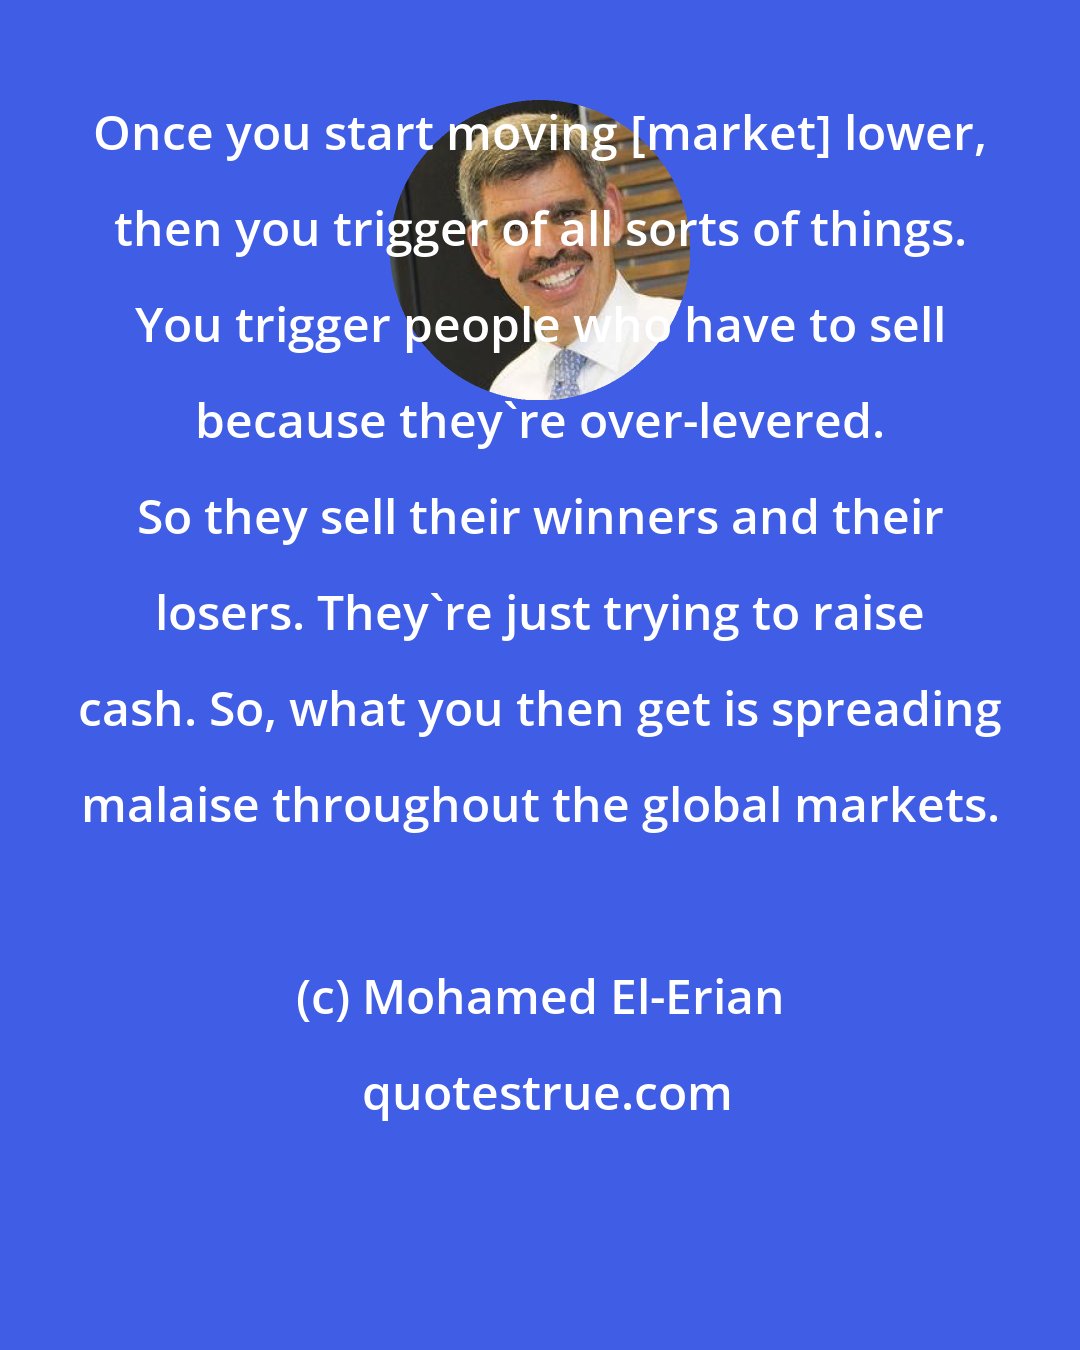 Mohamed El-Erian: Once you start moving [market] lower, then you trigger of all sorts of things. You trigger people who have to sell because they're over-levered. So they sell their winners and their losers. They're just trying to raise cash. So, what you then get is spreading malaise throughout the global markets.